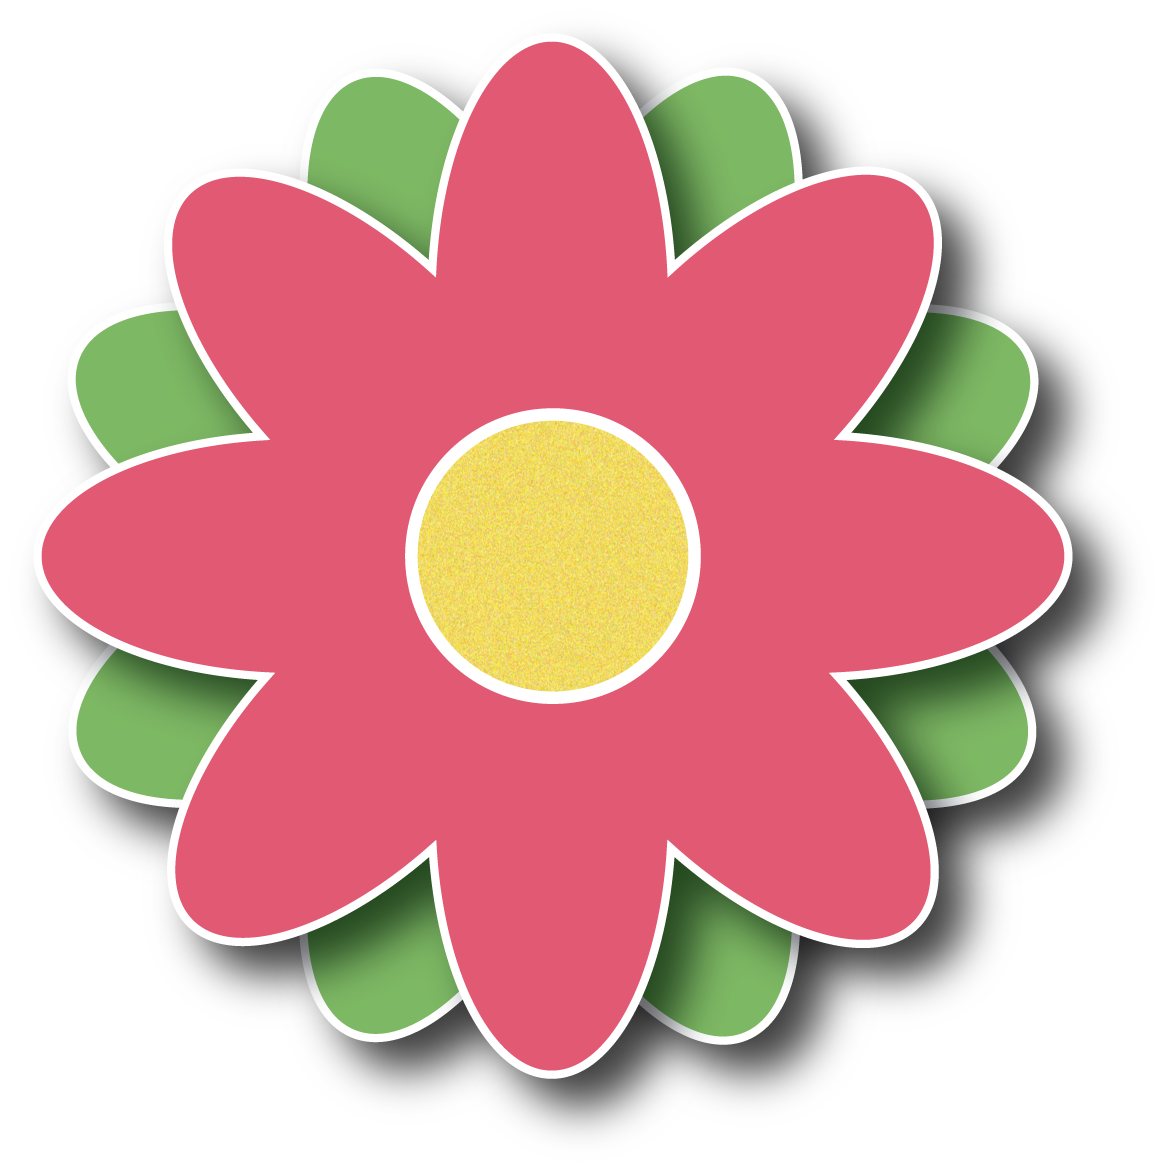 free clipart of flower - photo #49